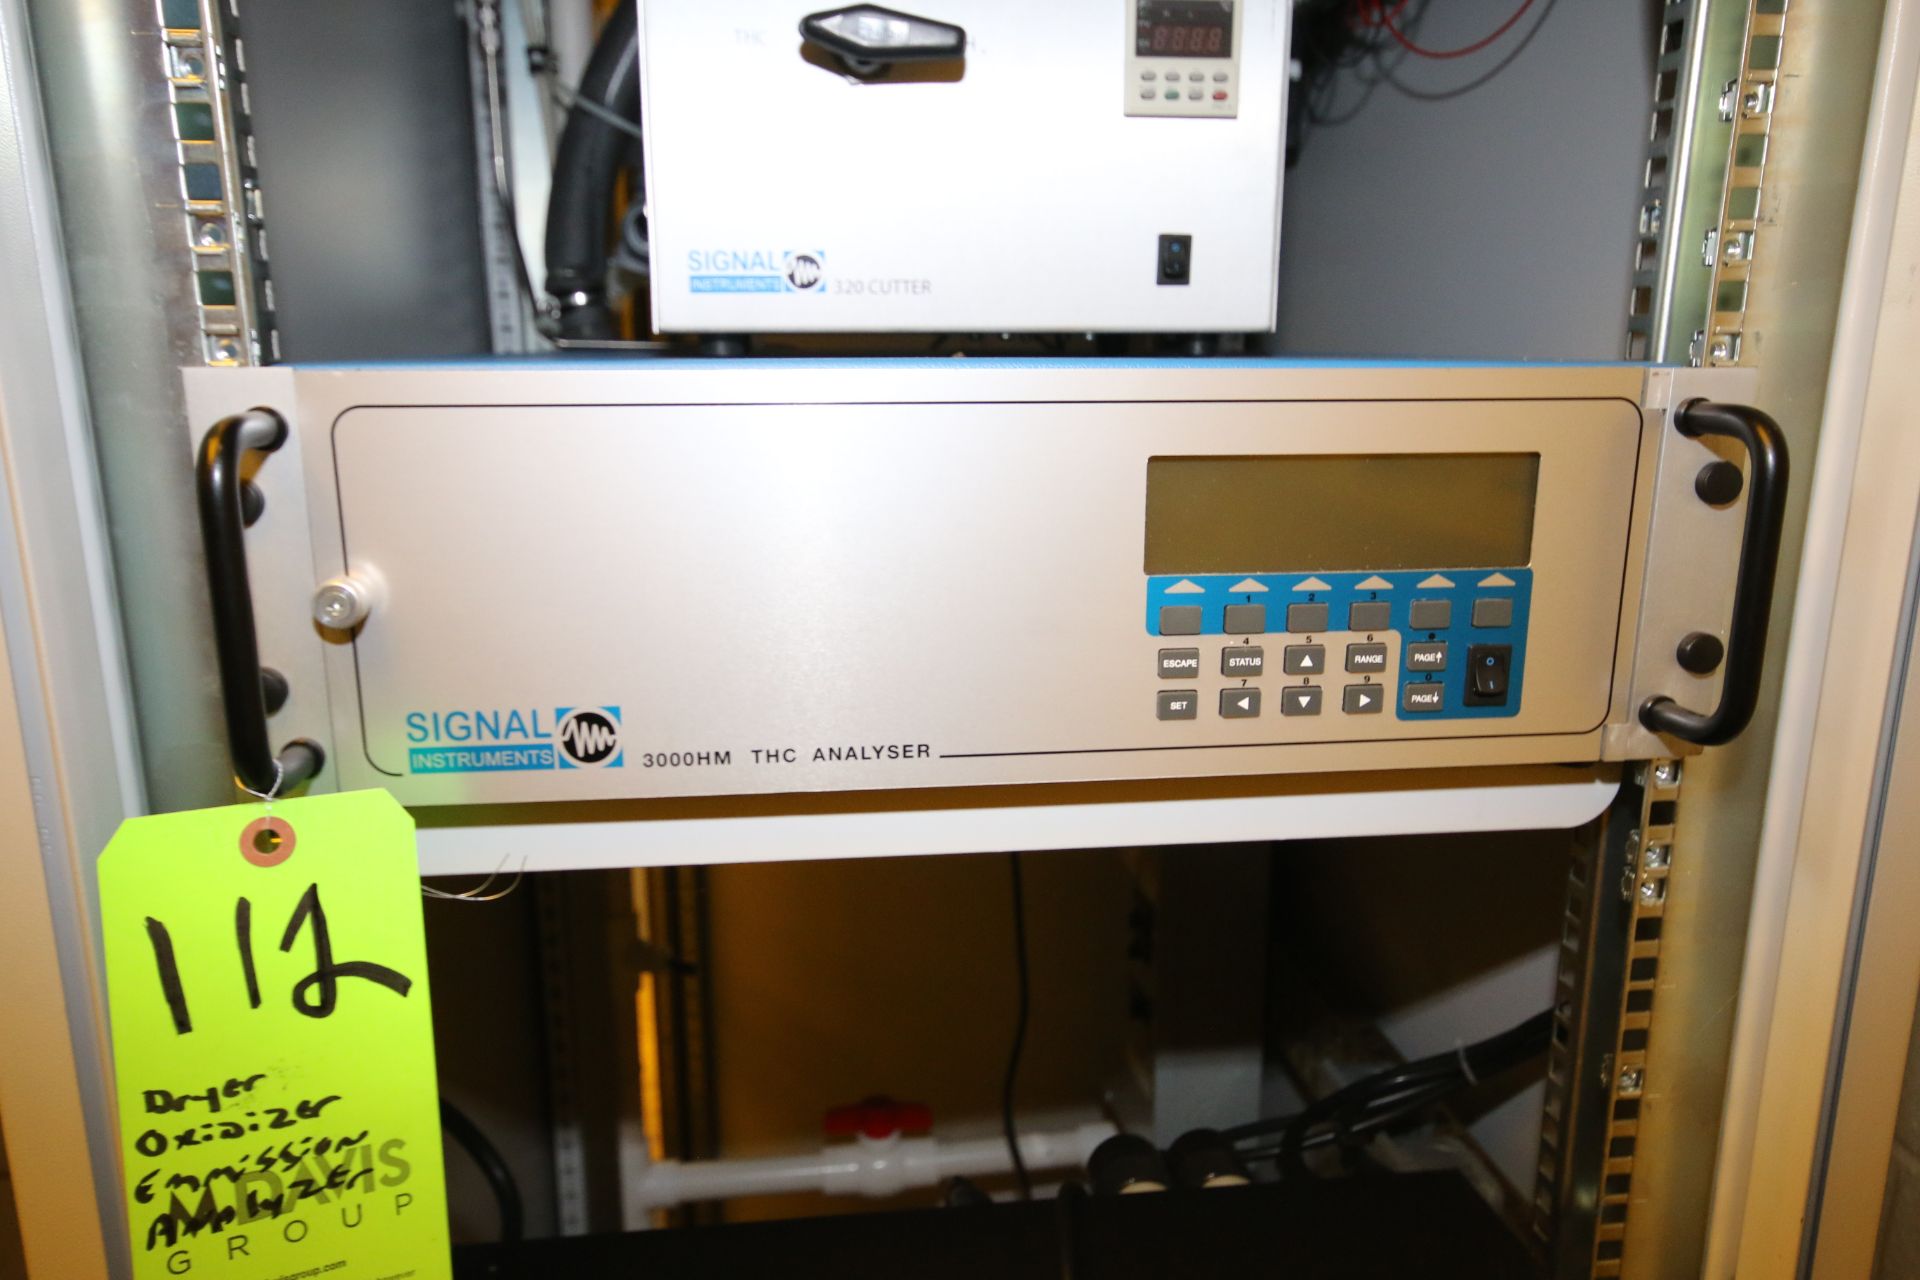 Dryer Oxidizer Emission Safety Analyzer Control Cabinet with Signal Instruments 320 Cutter and (2) - Image 5 of 6